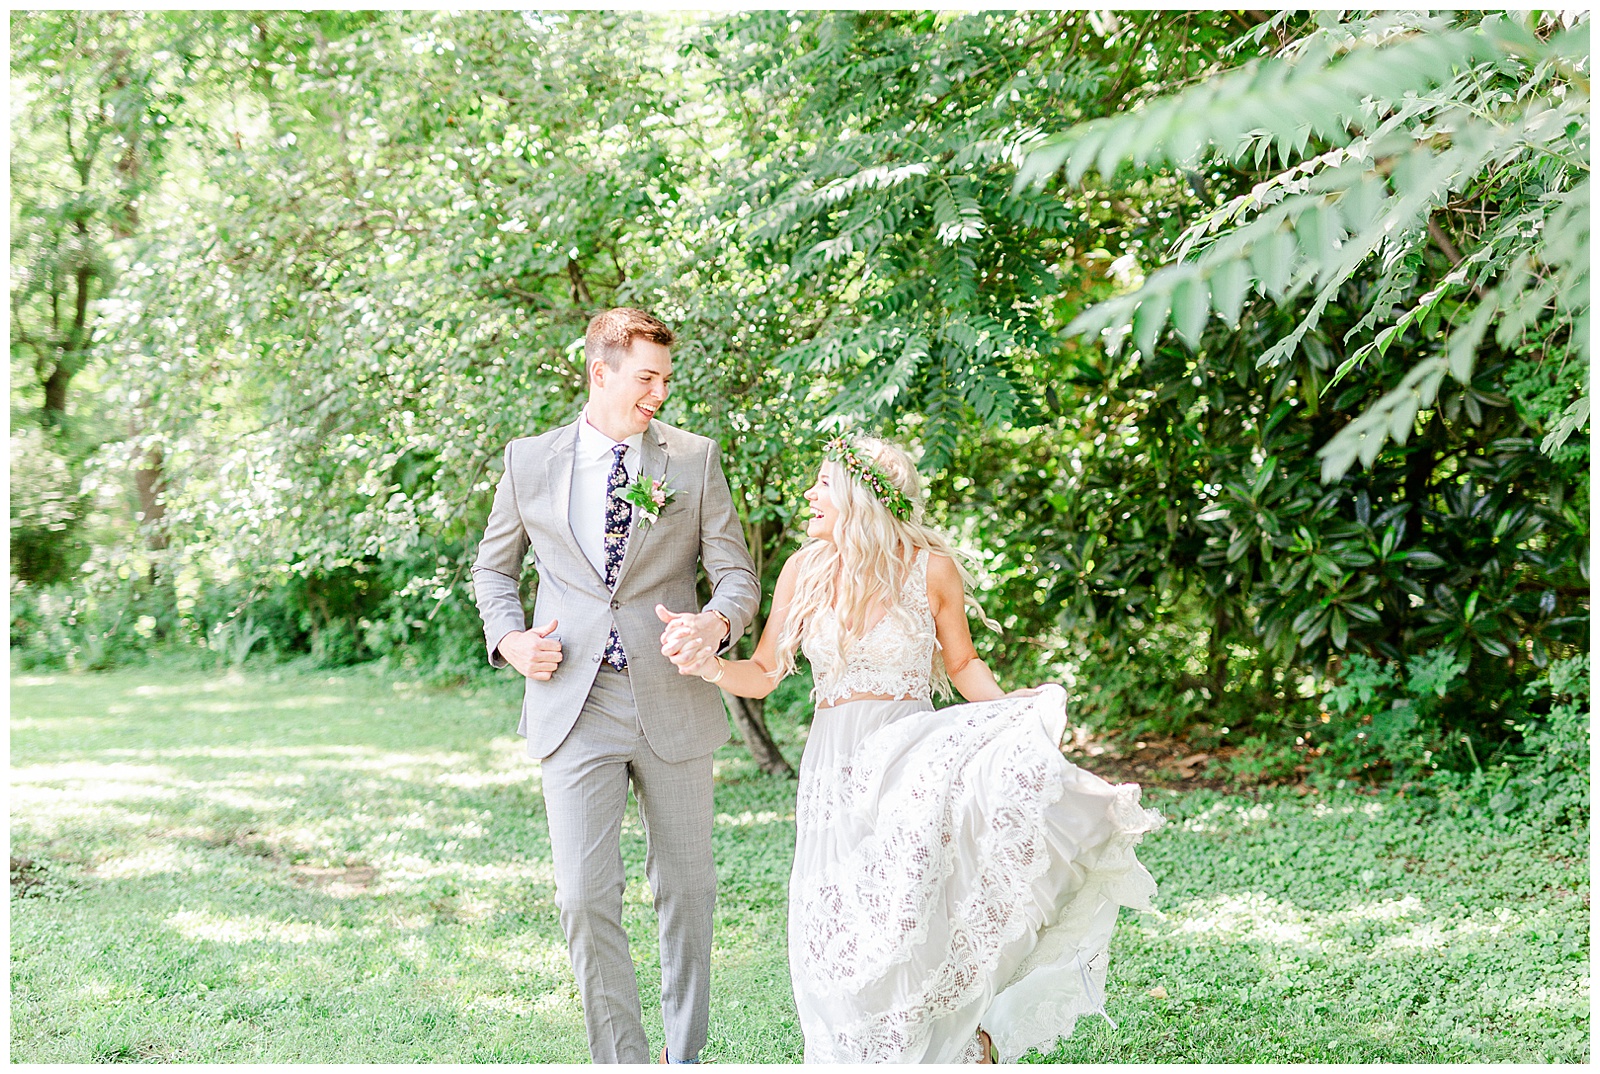 Enchanting Woodland Portraits of Bride and Groom from Boho Chic Wedding in Charlotte, NC | check out the full wedding at KevynDixonPhoto.com